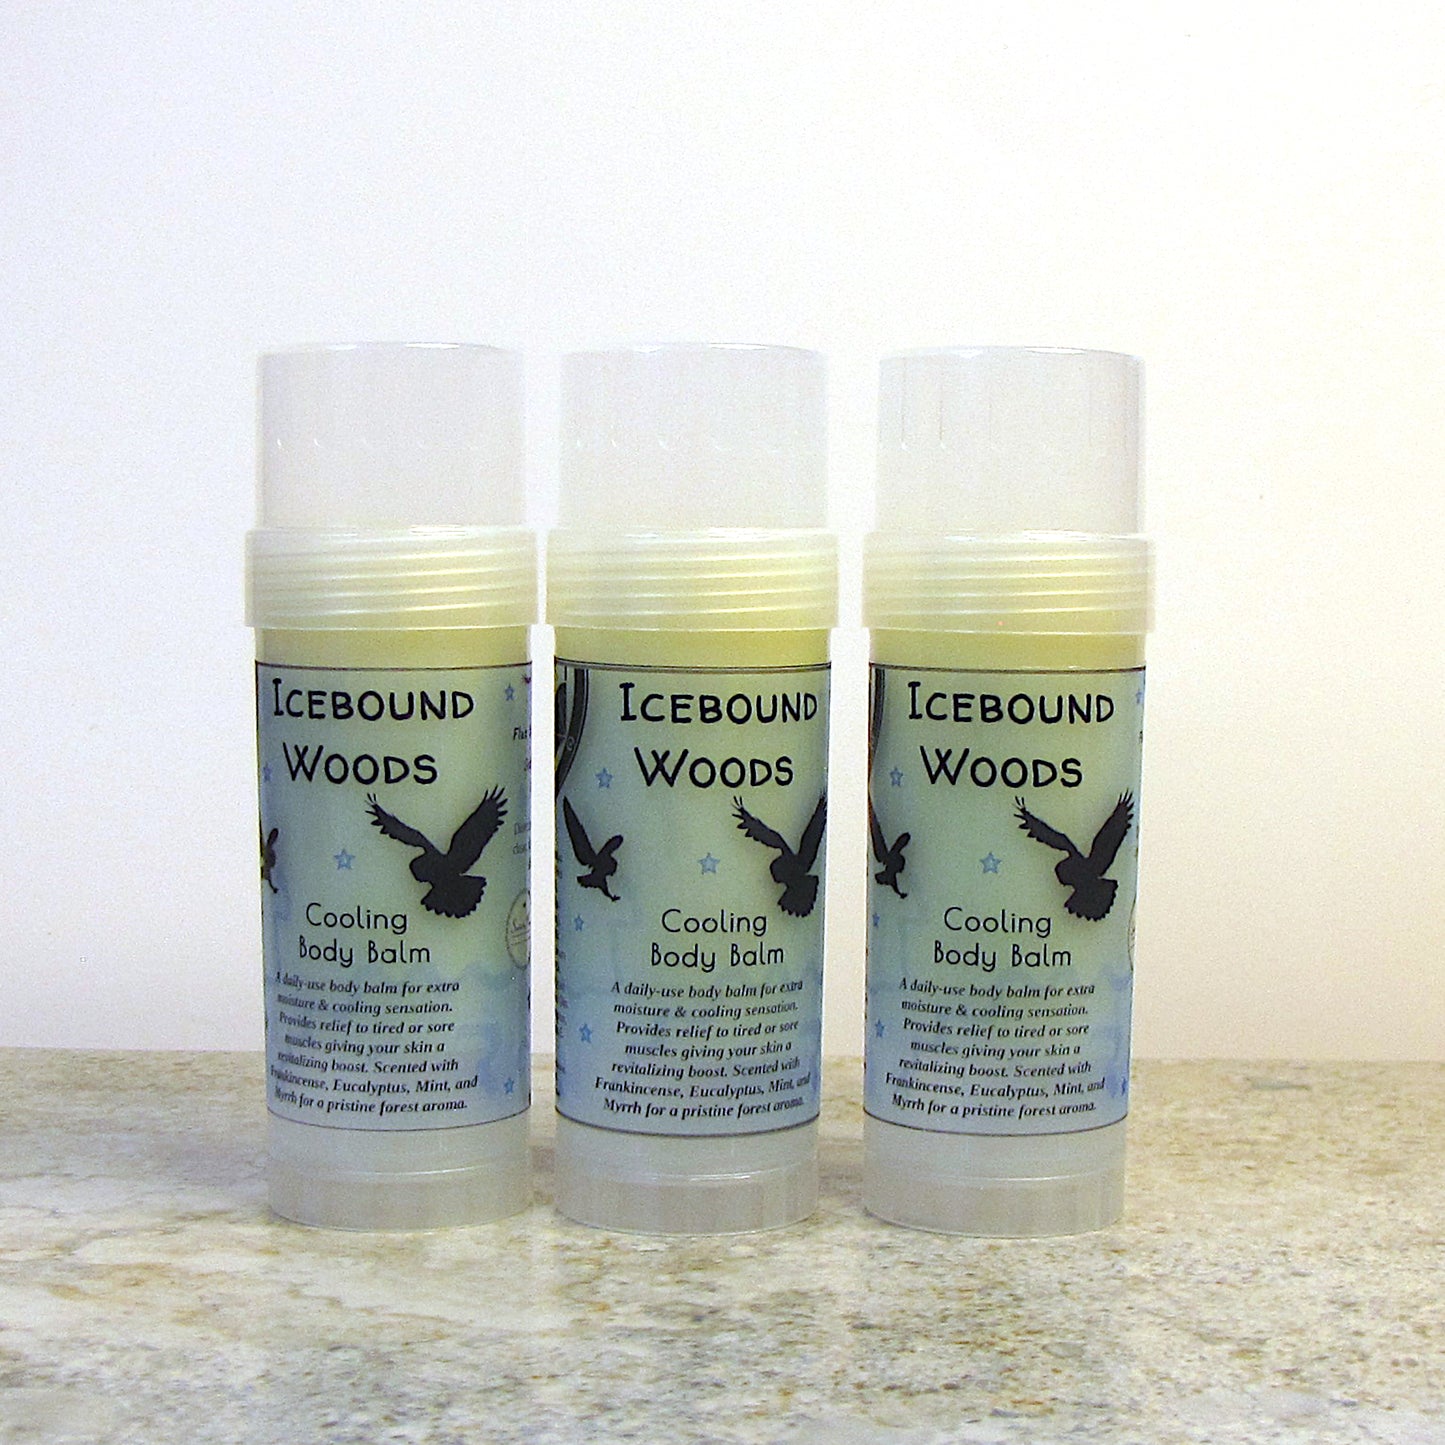 Icebound Woods - Cooling Body Balm with Menthol Crystals